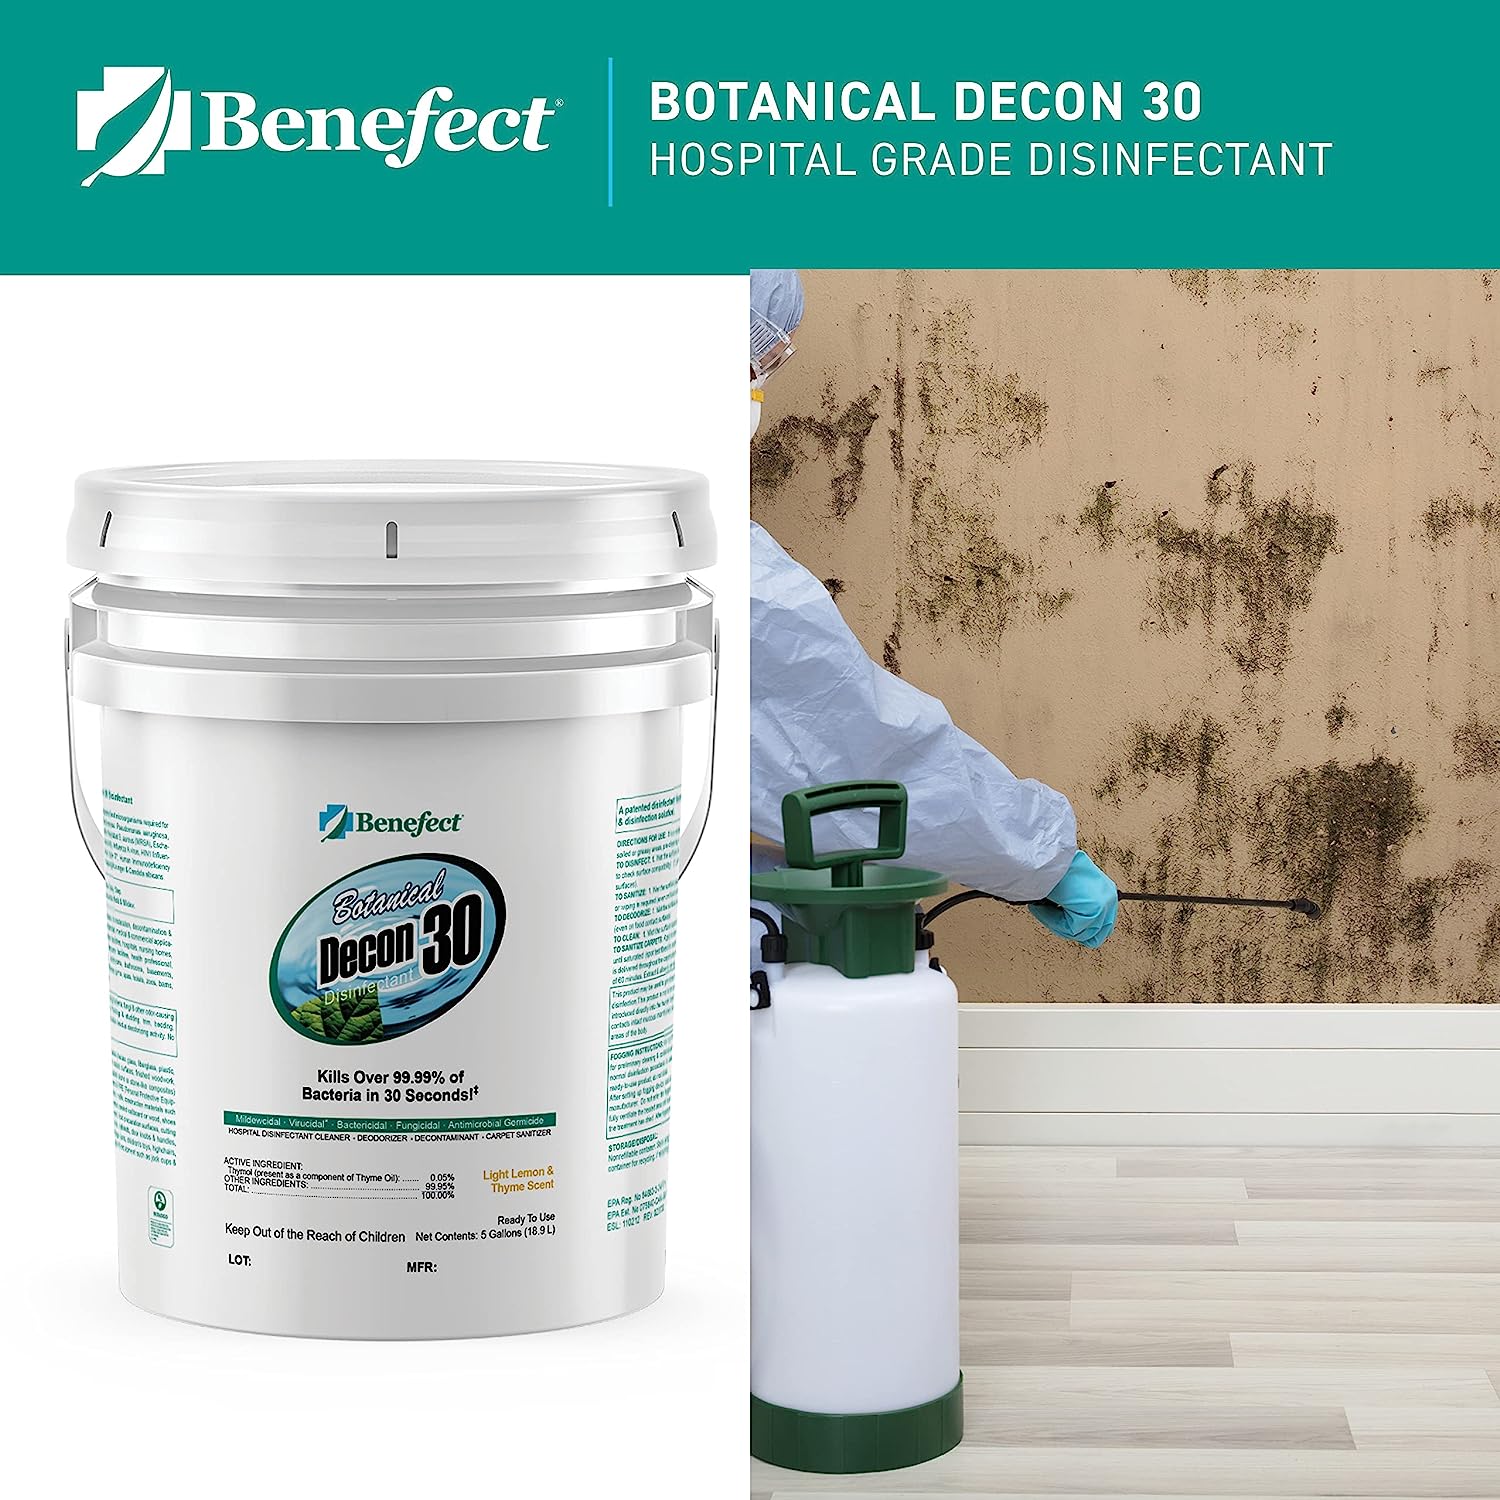 Benefect Botanical Decon 30 Disinfectant Cleaner PURELY PLANT-BASED: Benefect's complete range is infused with botanical ingredients, eschewing harsh or synthetic chemicals. The EPA acknowledges these products for posing no known risks to human health or the environment. ELIMINATES 99.99% OF MICROBES in a mere 30 seconds, making it the ideal solution for high-traffic areas like countertops, children’s toys, cutting boards, and more. This leaves a gentle whisper of lemon and thyme aroma behind. TRUSTED & RELIABLE: Benefect Decon 30 ensures safe use on food-contact surfaces without the need for subsequent rinsing or wiping. It stands as the top pick for managing water damage in the kitchen or tackling a school virus outbreak. USER-FRIENDLY: Comes as a ready-to-use solution, with no need for mixing or diluting. Proudly certified as 100% biobased by the USDA BioPreferred Program and carries the UL EcoLogo Certification. WHERE SAFETY & EFFICACY ARE PARAMOUNT, Benefect is the trusted choice for restoration and remediation professionals.